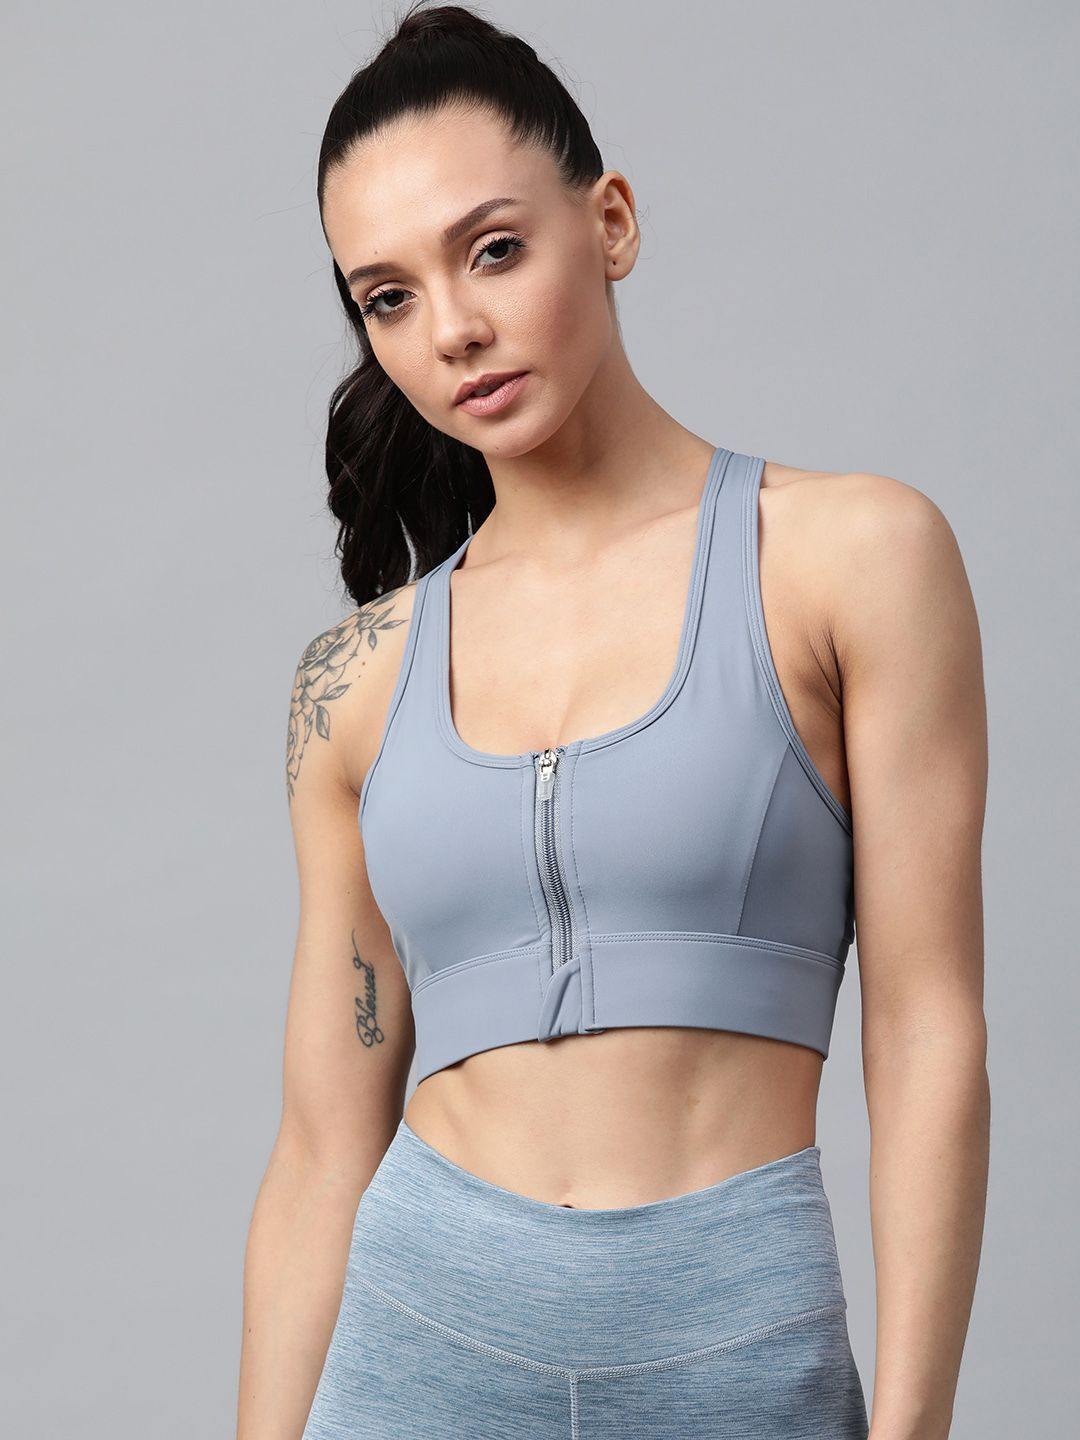 ZYDNFE Womens Outfit Sets Yoga Shirts Sports Bras for Big Boobs